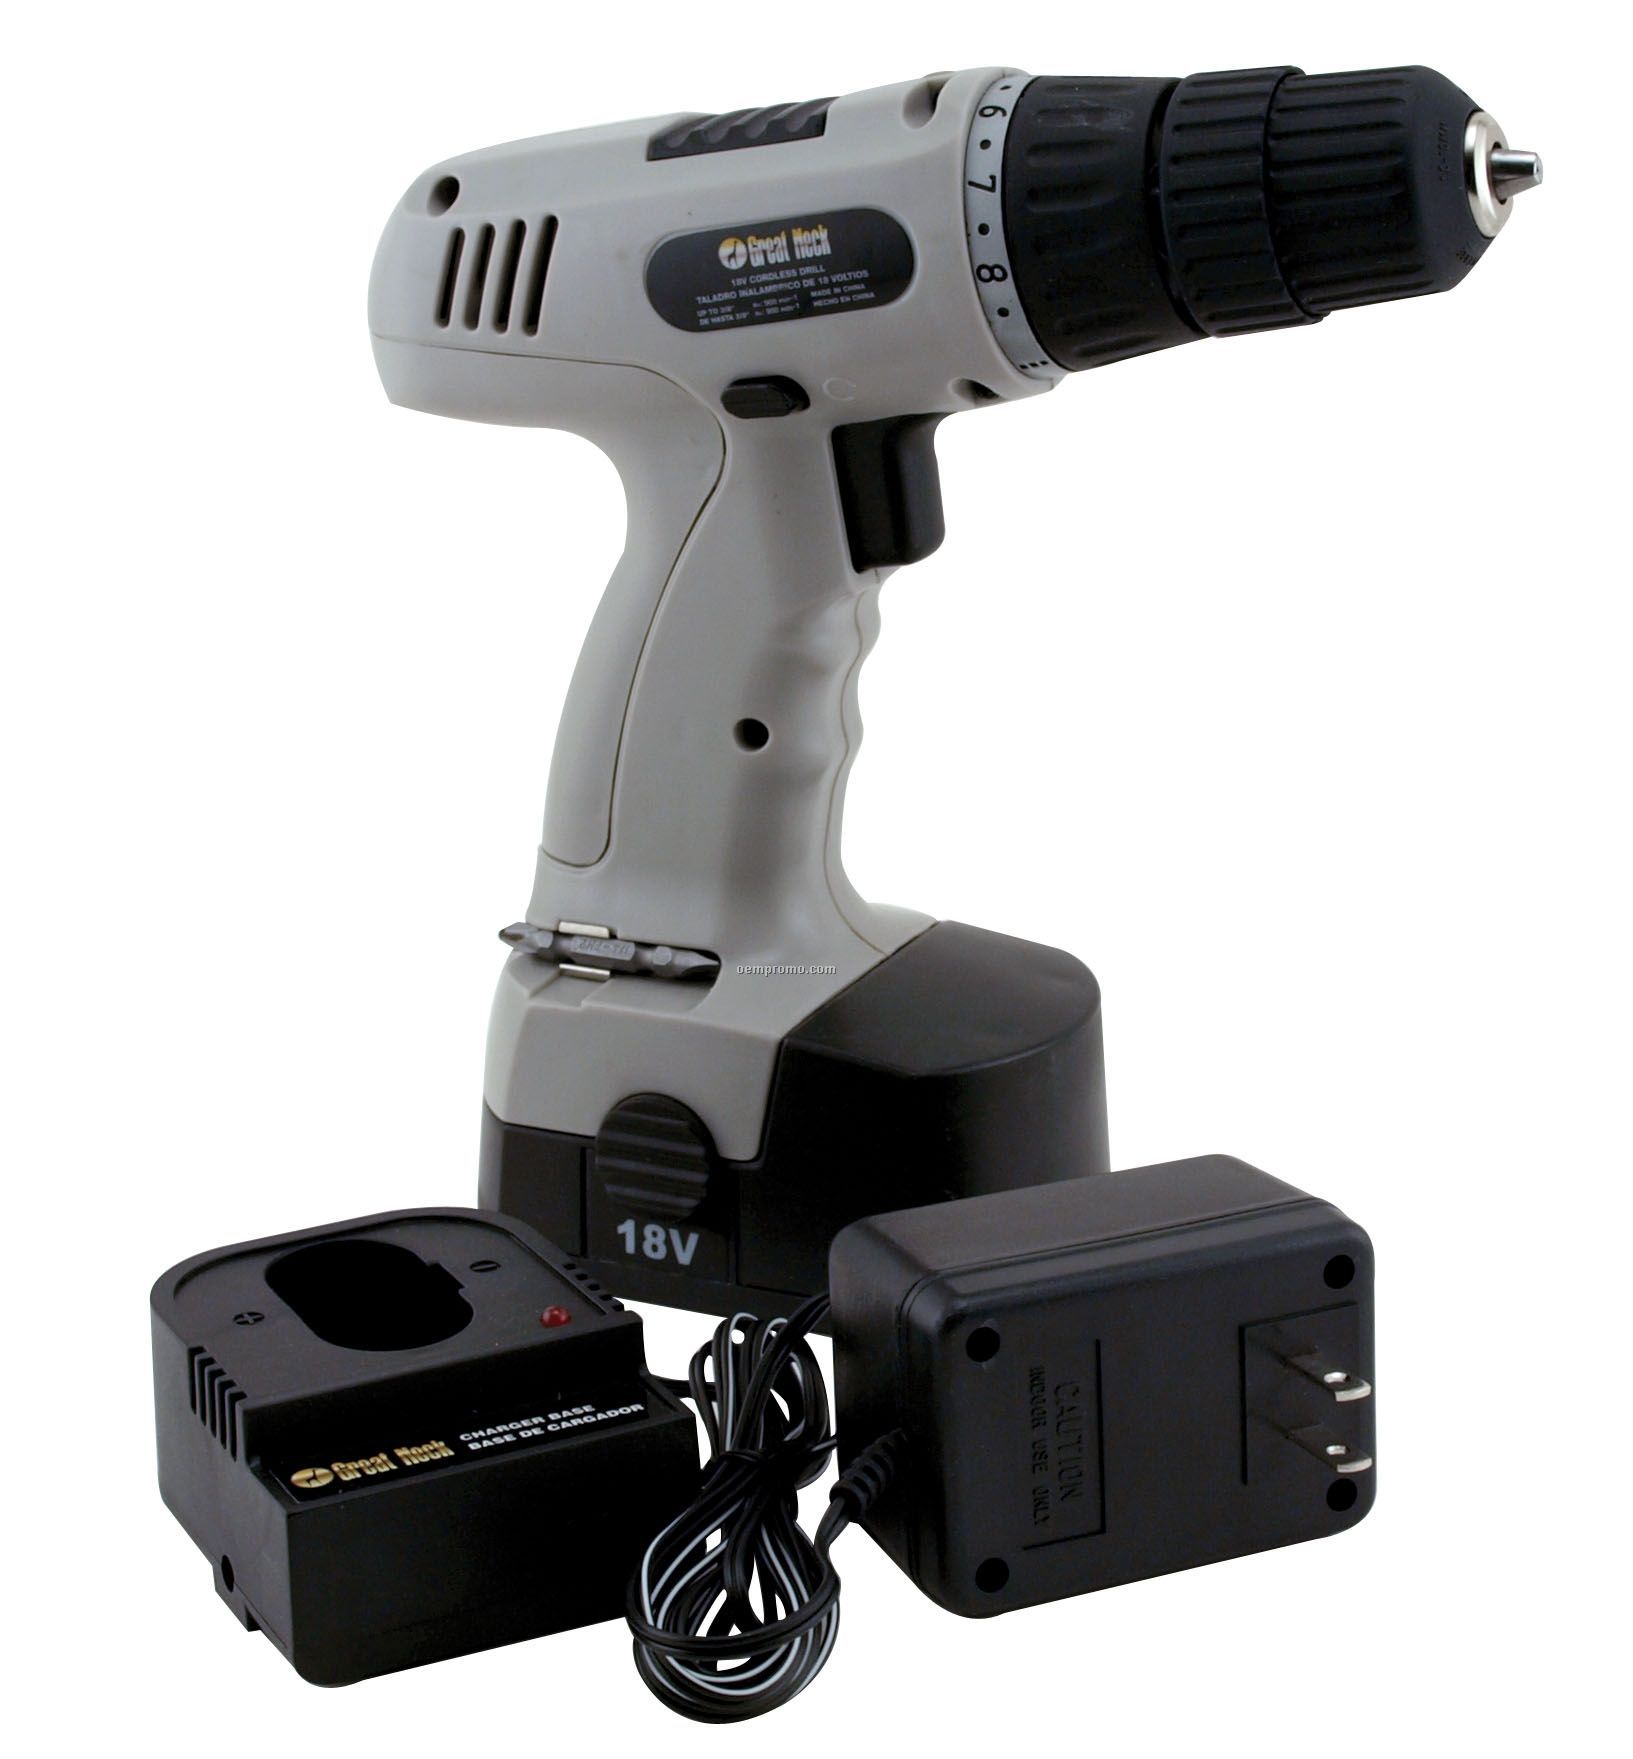 Rechargeable Cordless Drill (18 Volt)